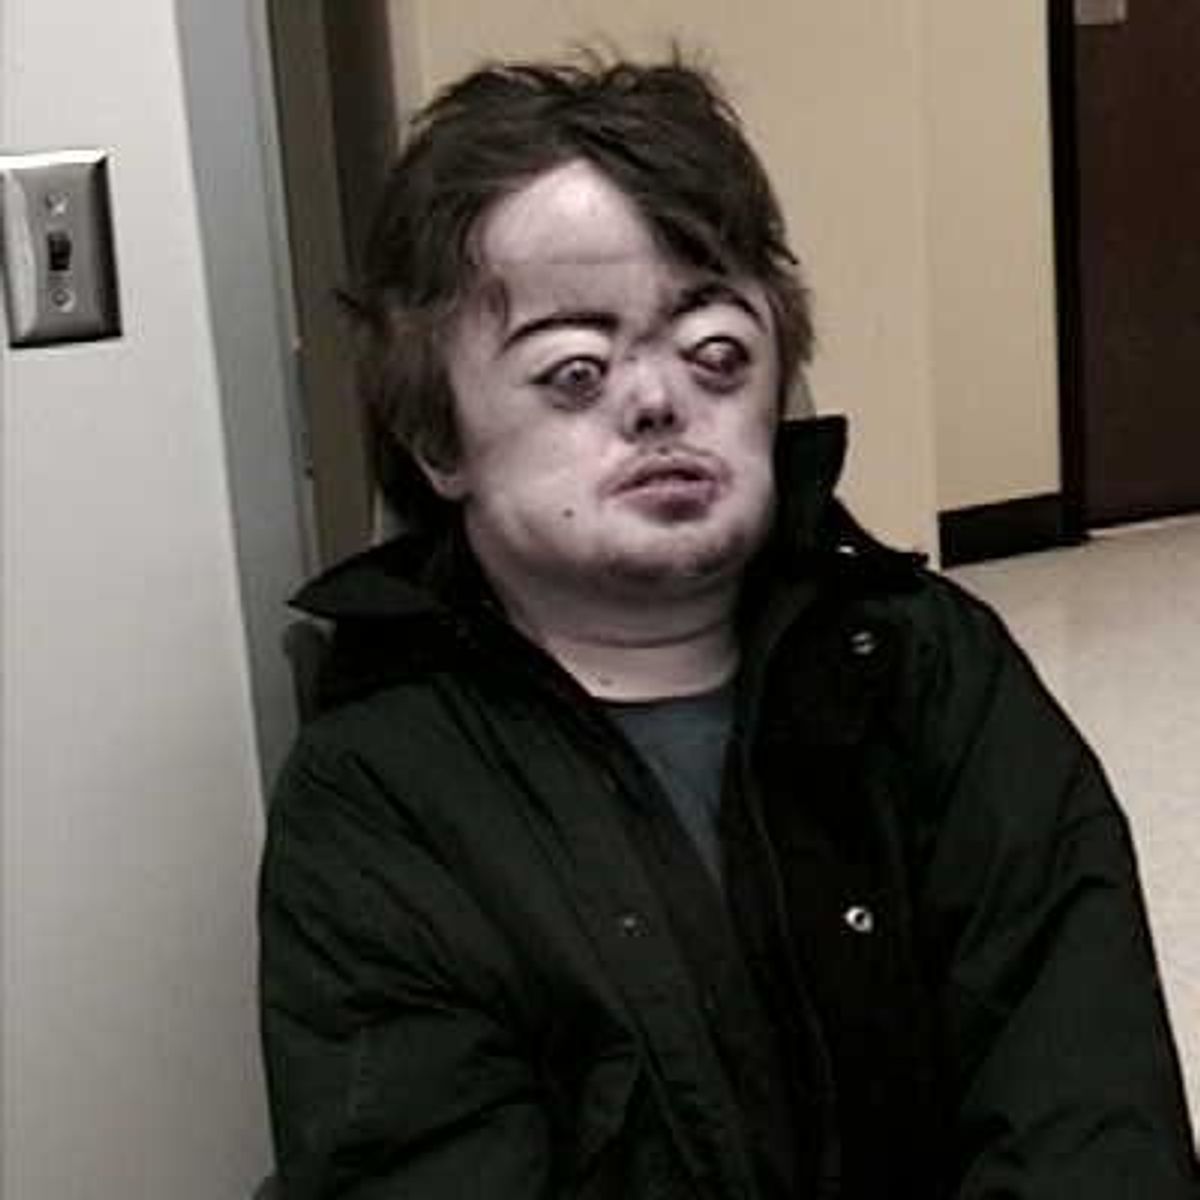 Brian Peppers Snopes image photo